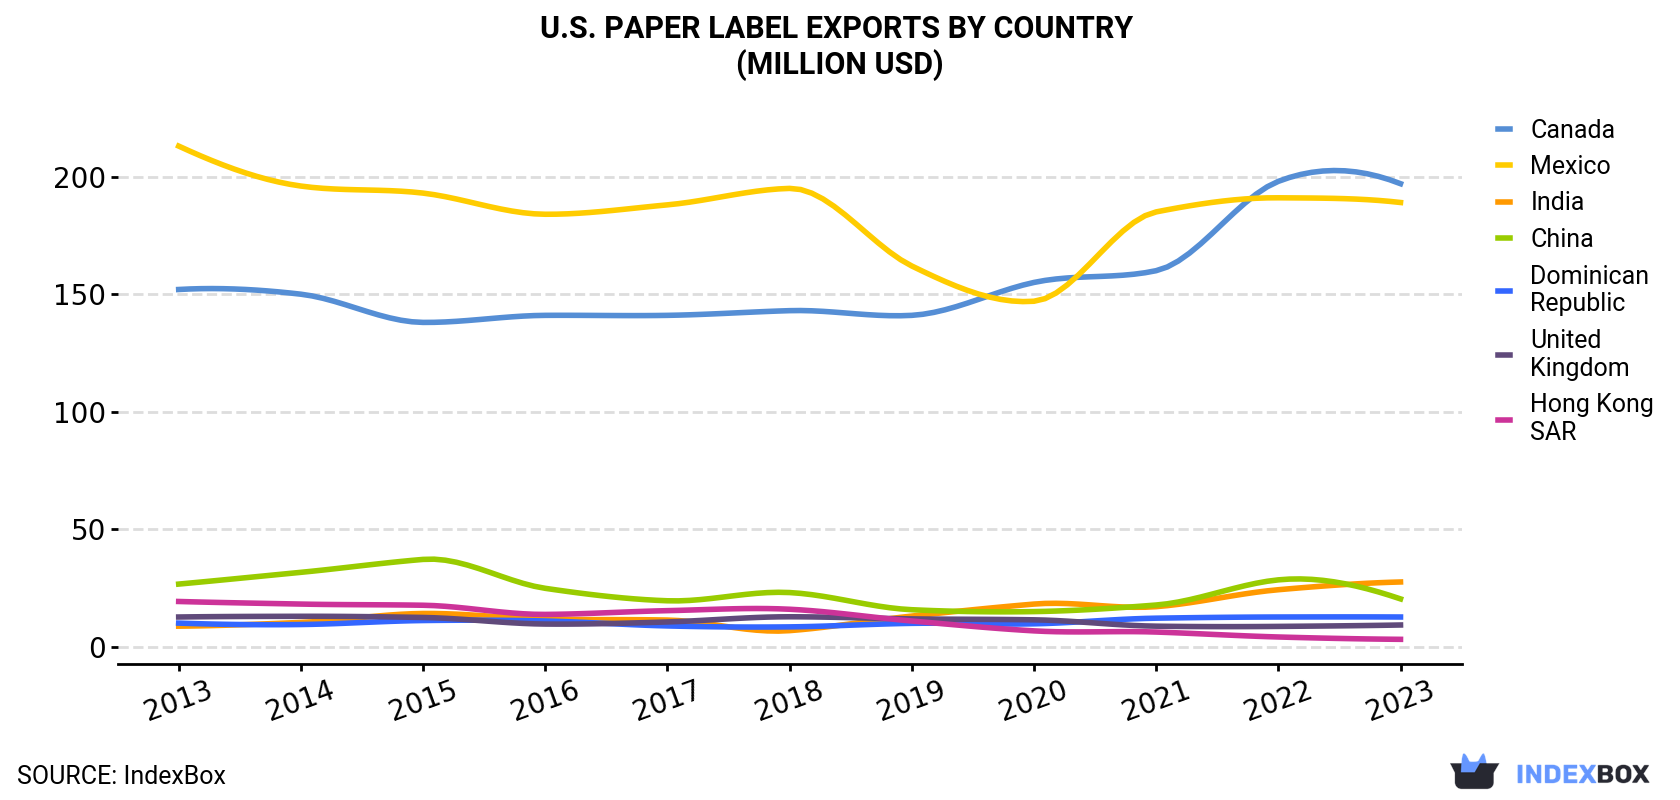 U.S. Paper Label Exports By Country (Million USD)